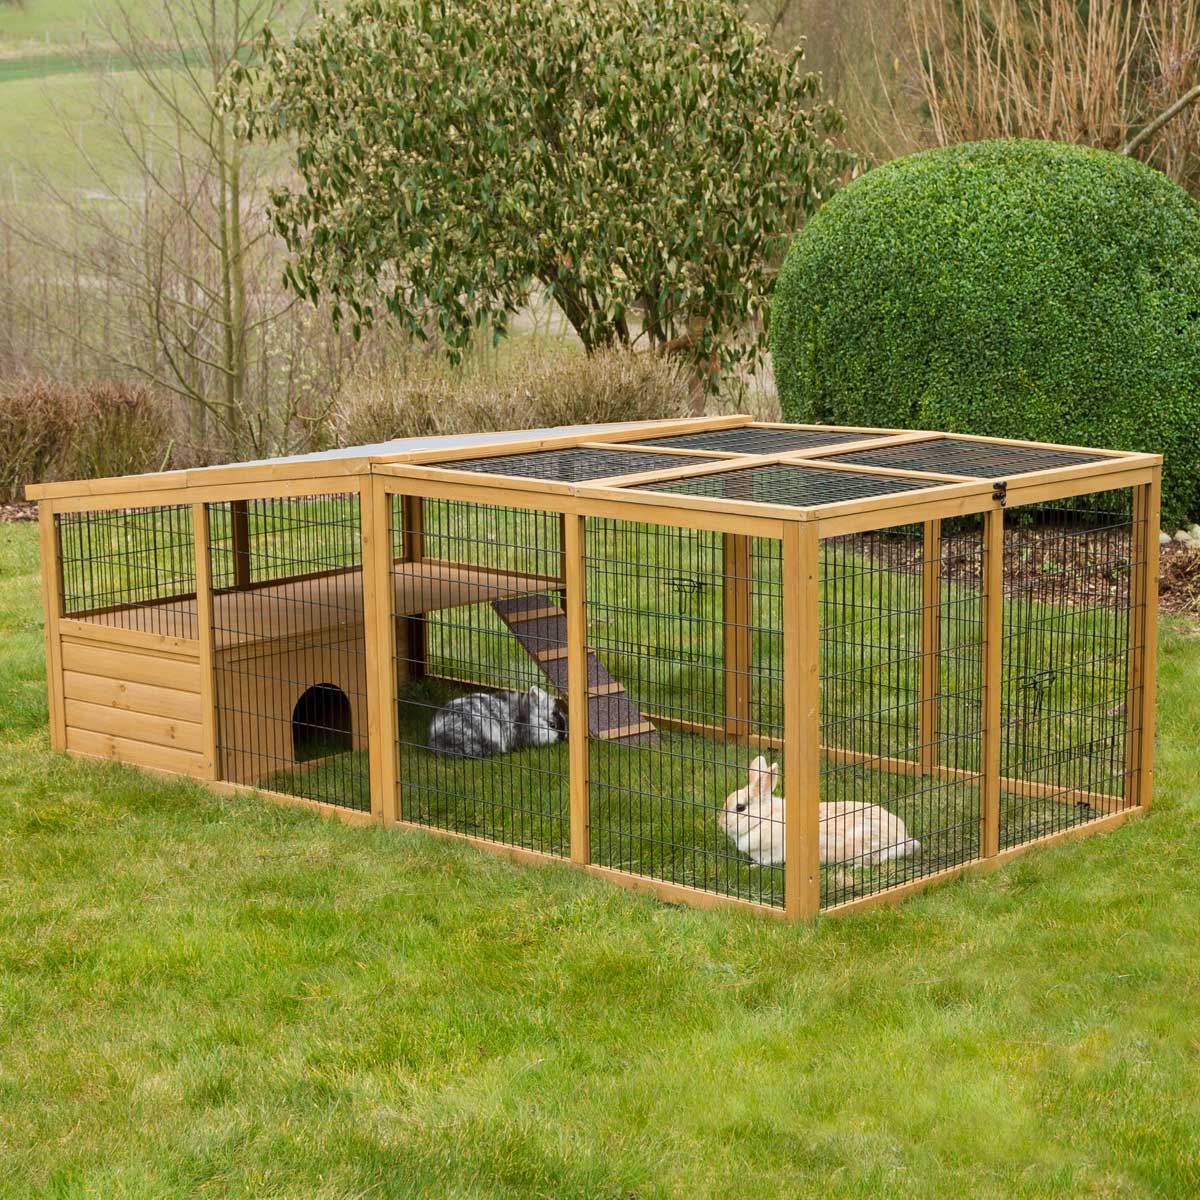 Open-air enclosure with breakout barrier